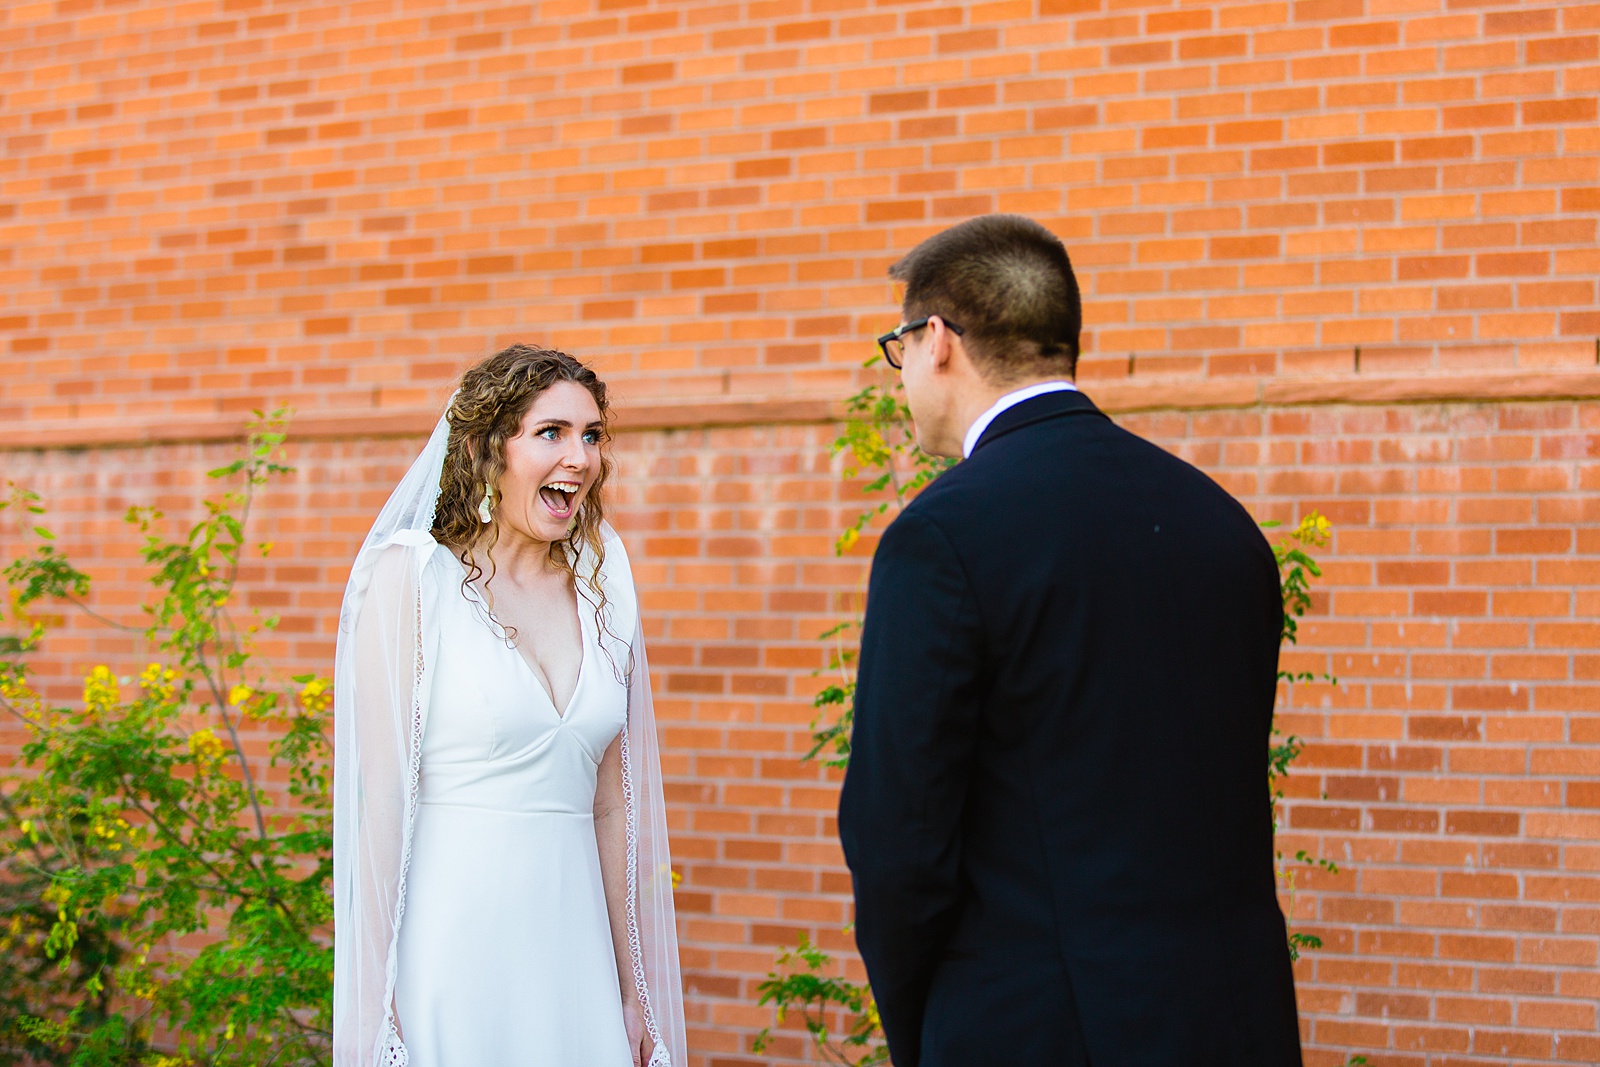 Bride and groom's first look at Arizona Historical Society by Tempe wedding photographer PMA Photography.